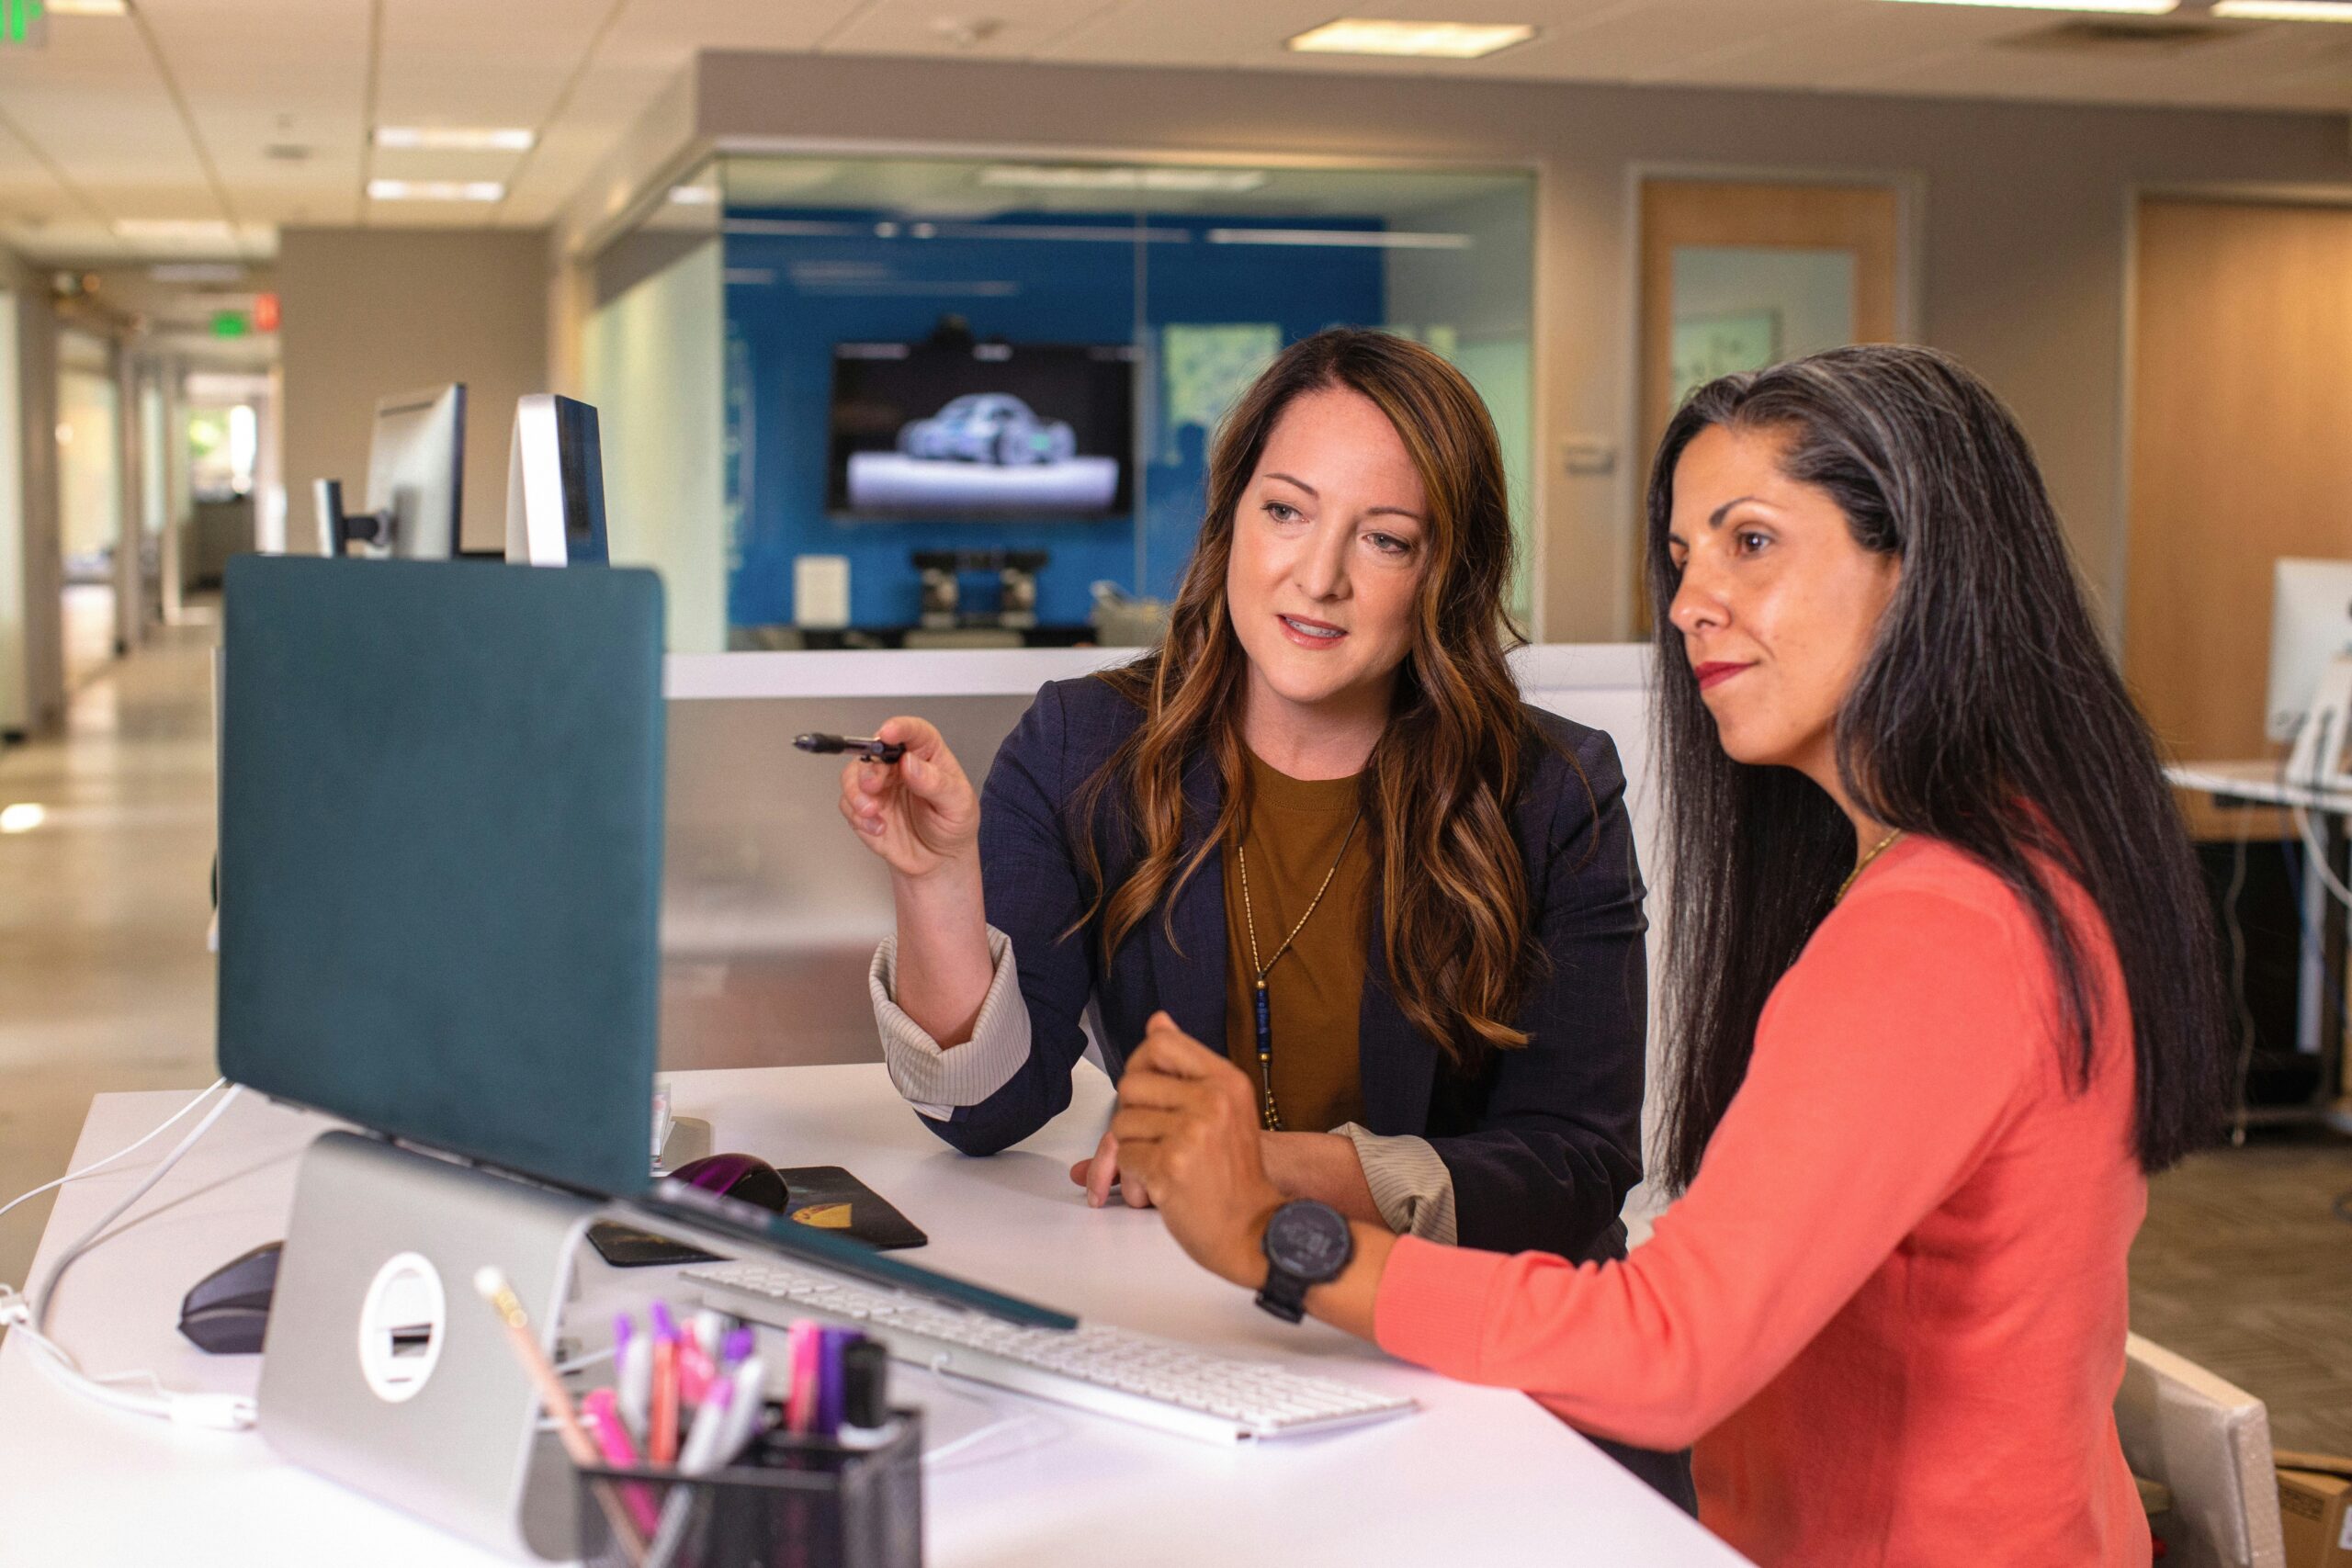 Two women review IT consulting content on a computer screen in a modern office, one pointing at the screen while discussing.